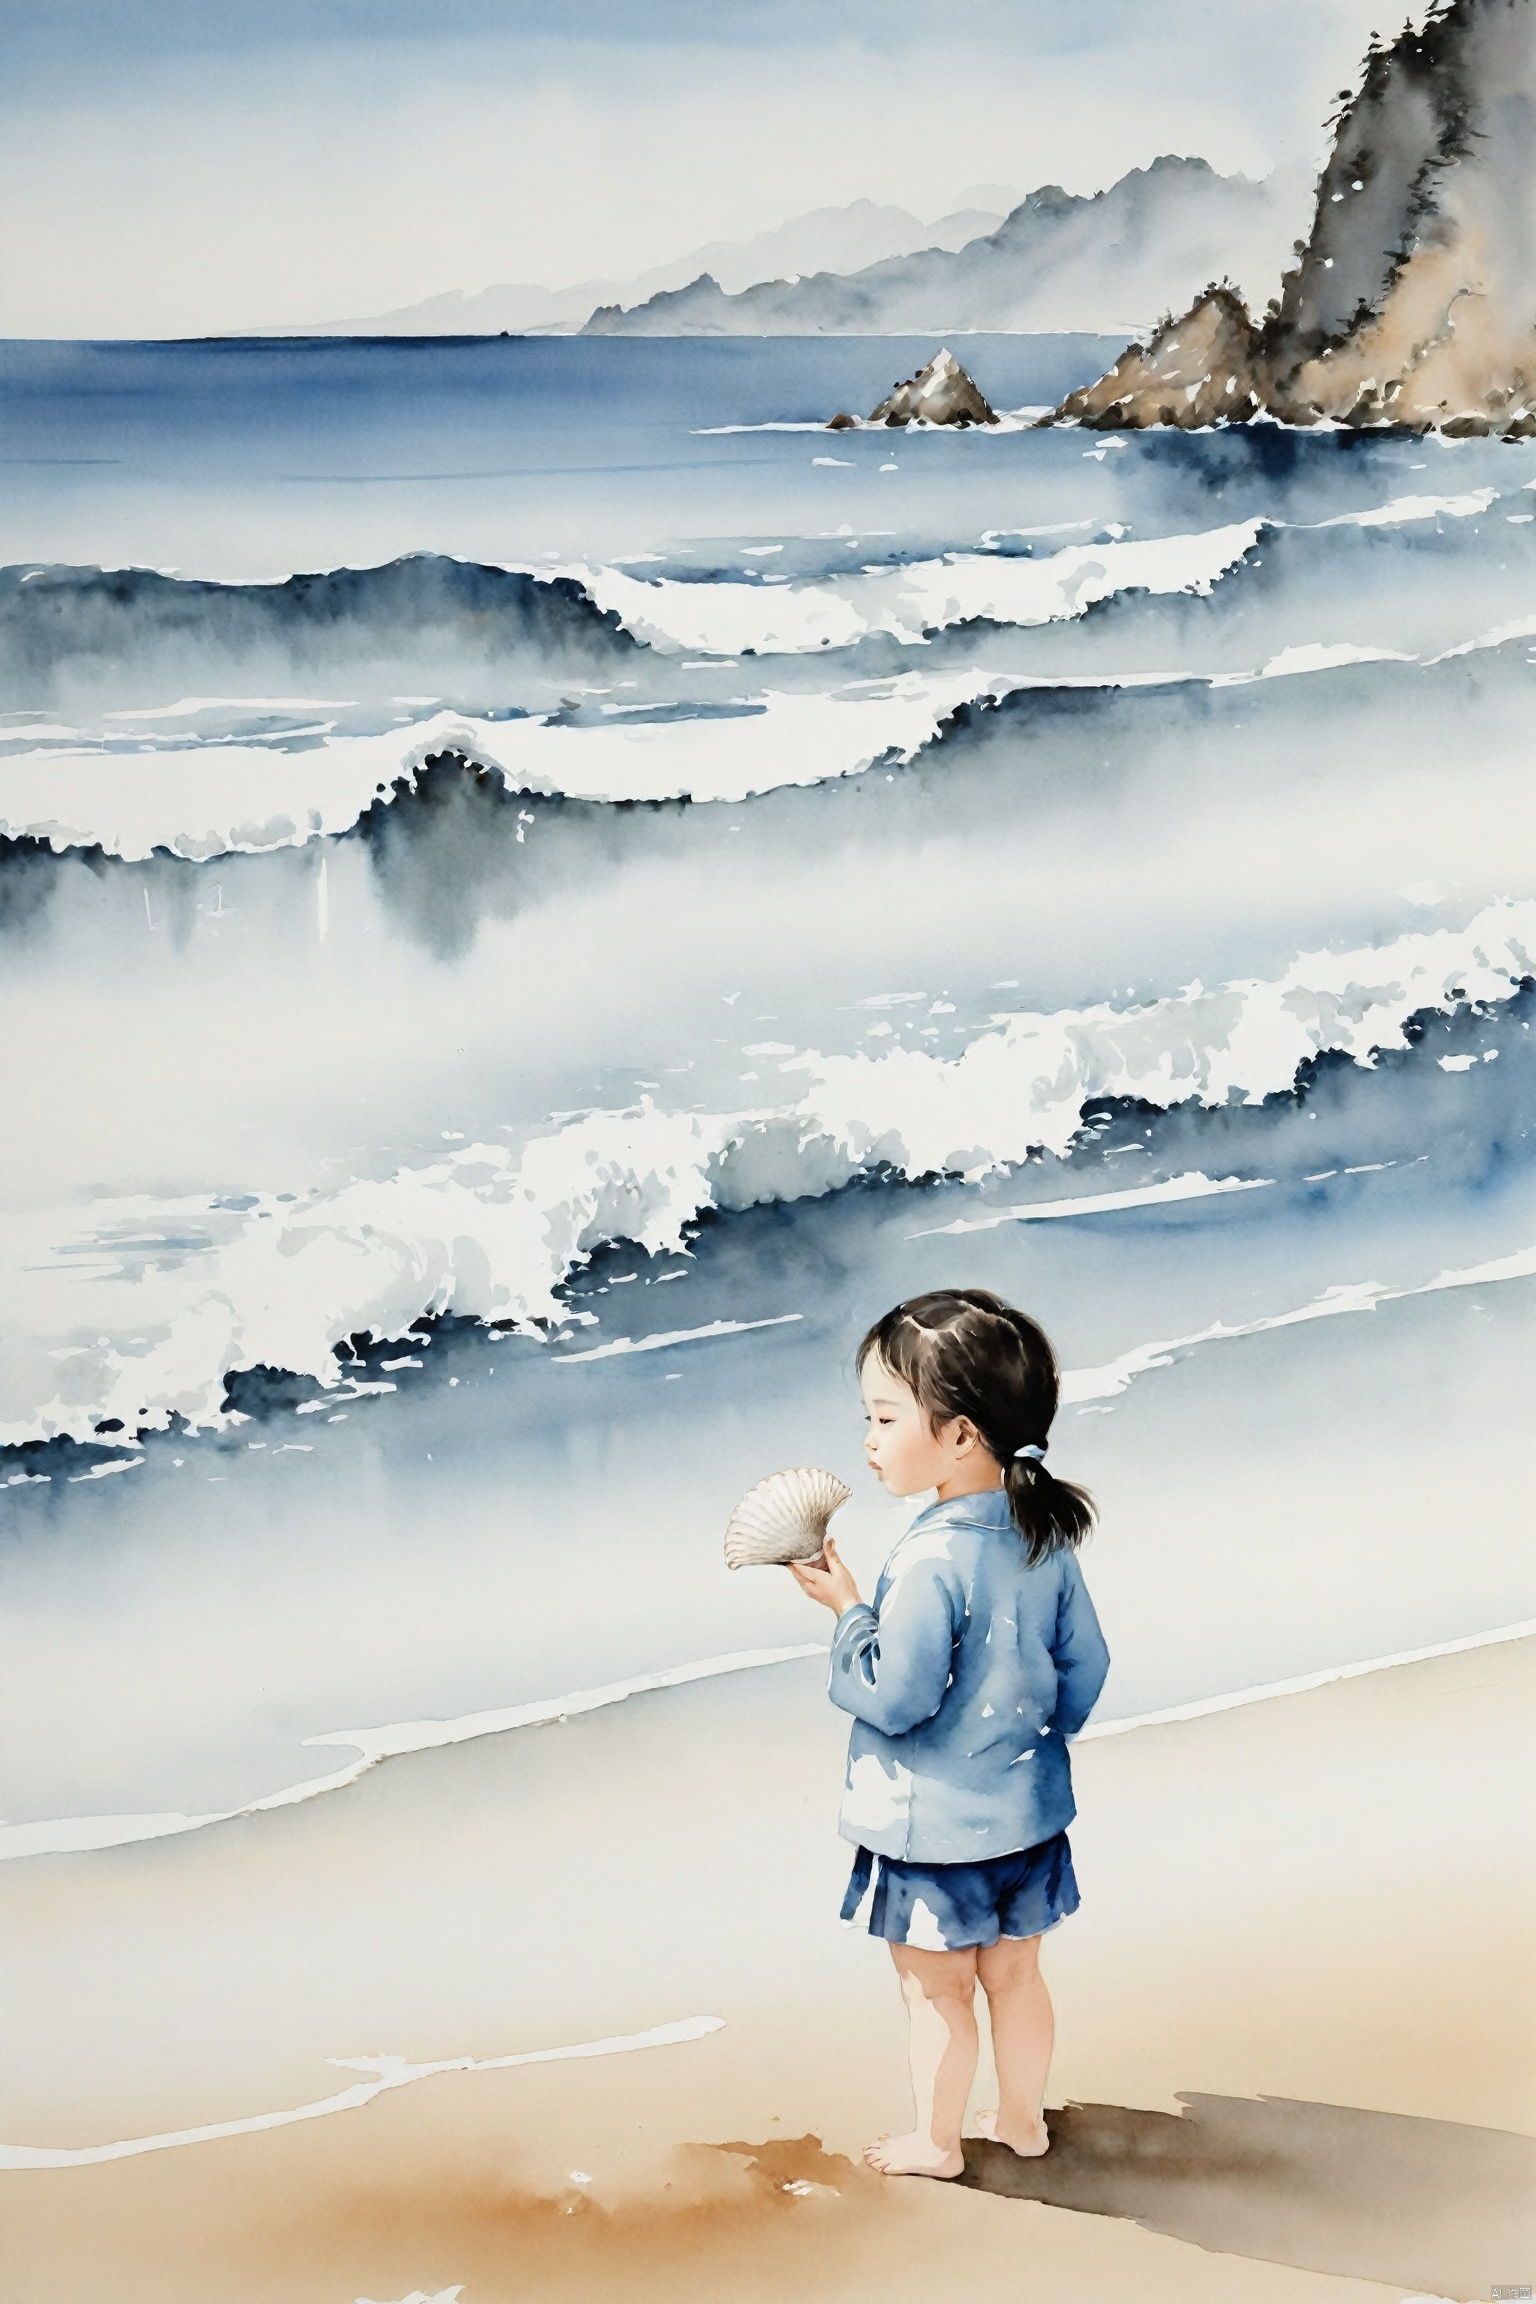  traditional chinese ink painting,A little girl on the beach by the sea, holds a seashell in her hand, intently listening to the sound of the waves. Behind her is a vast expanse of blue ocean, with waves gently lapping the shore, creating a harmonious scene with the girl's tranquility.